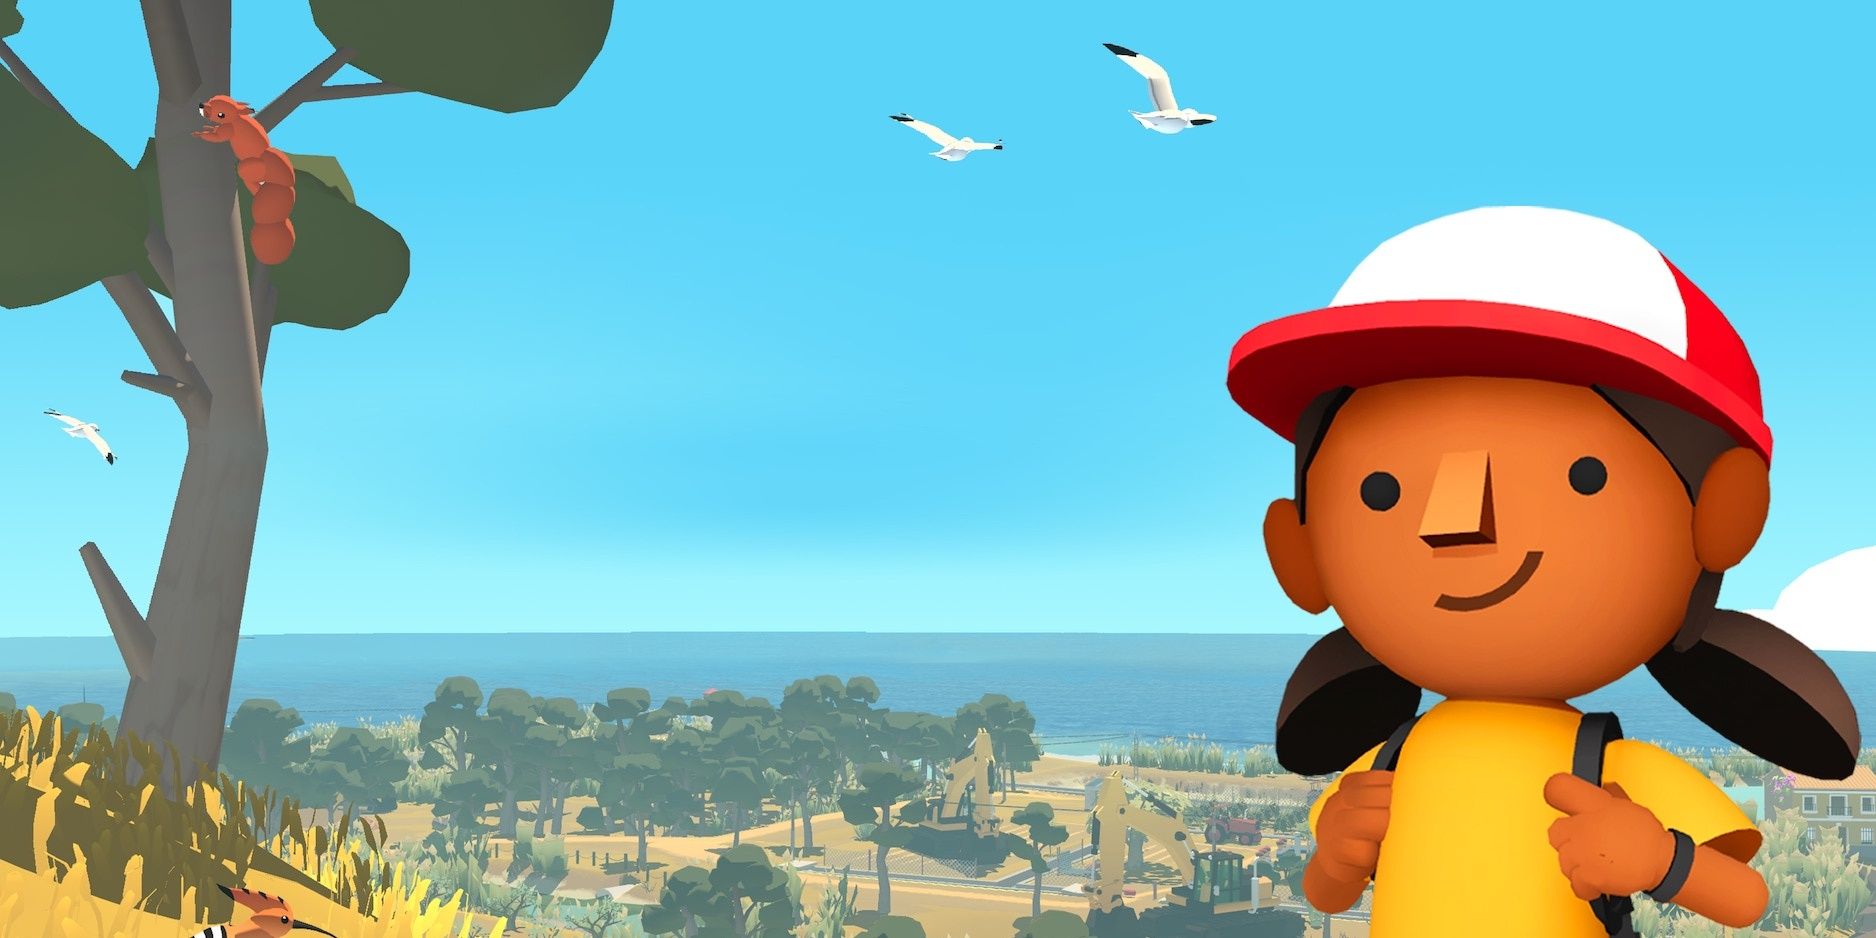 Alba (right), standing on a hill overlooking the island's town (right), A tree with a squirrel (left) is on the hill and sea gulls are flying in a clear blue sky. Photo Credit: gamesradar.com